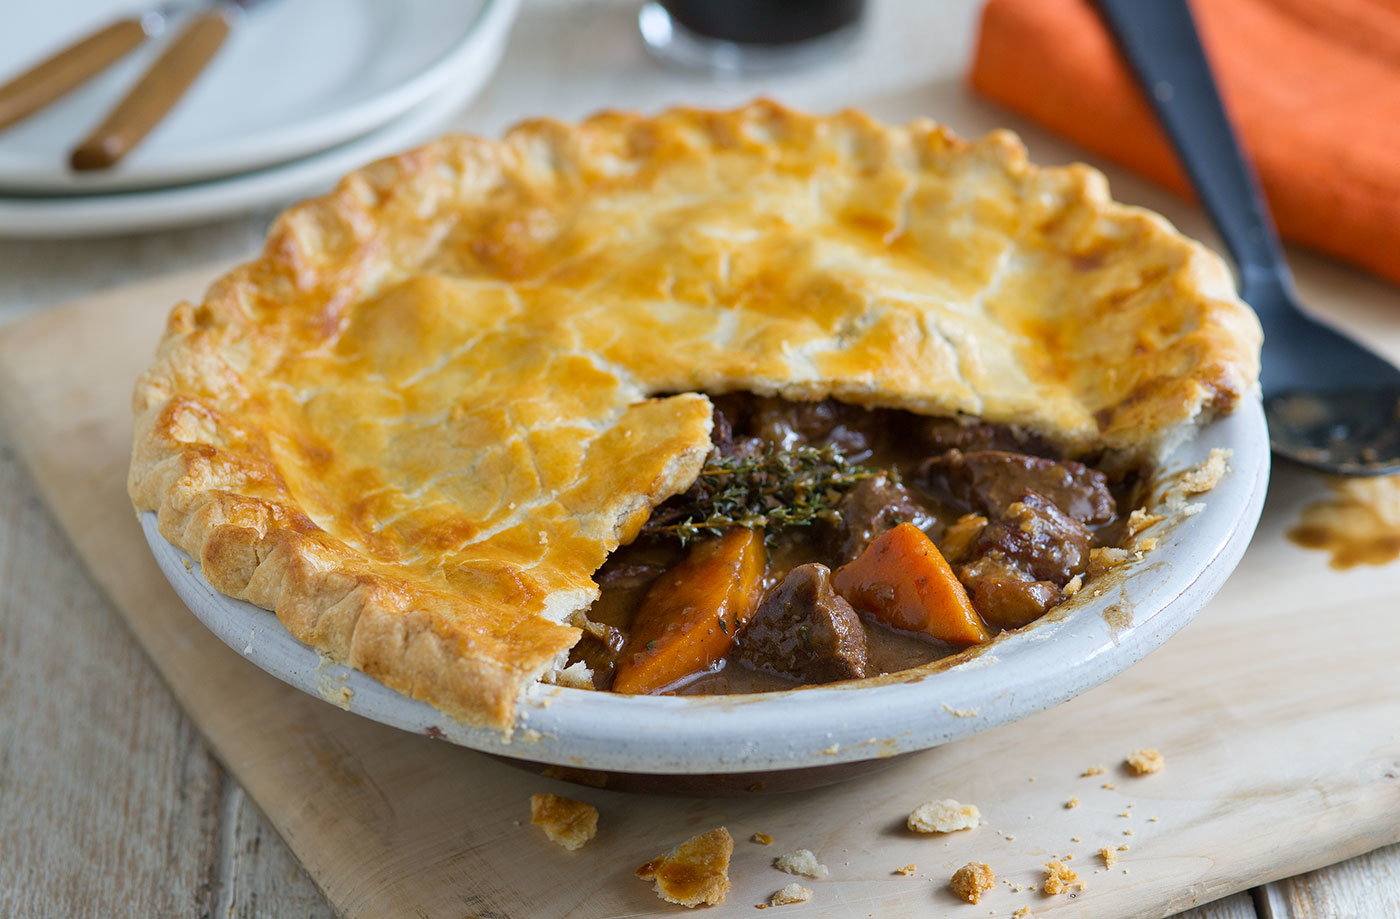 Beef-and-Guinness-pie